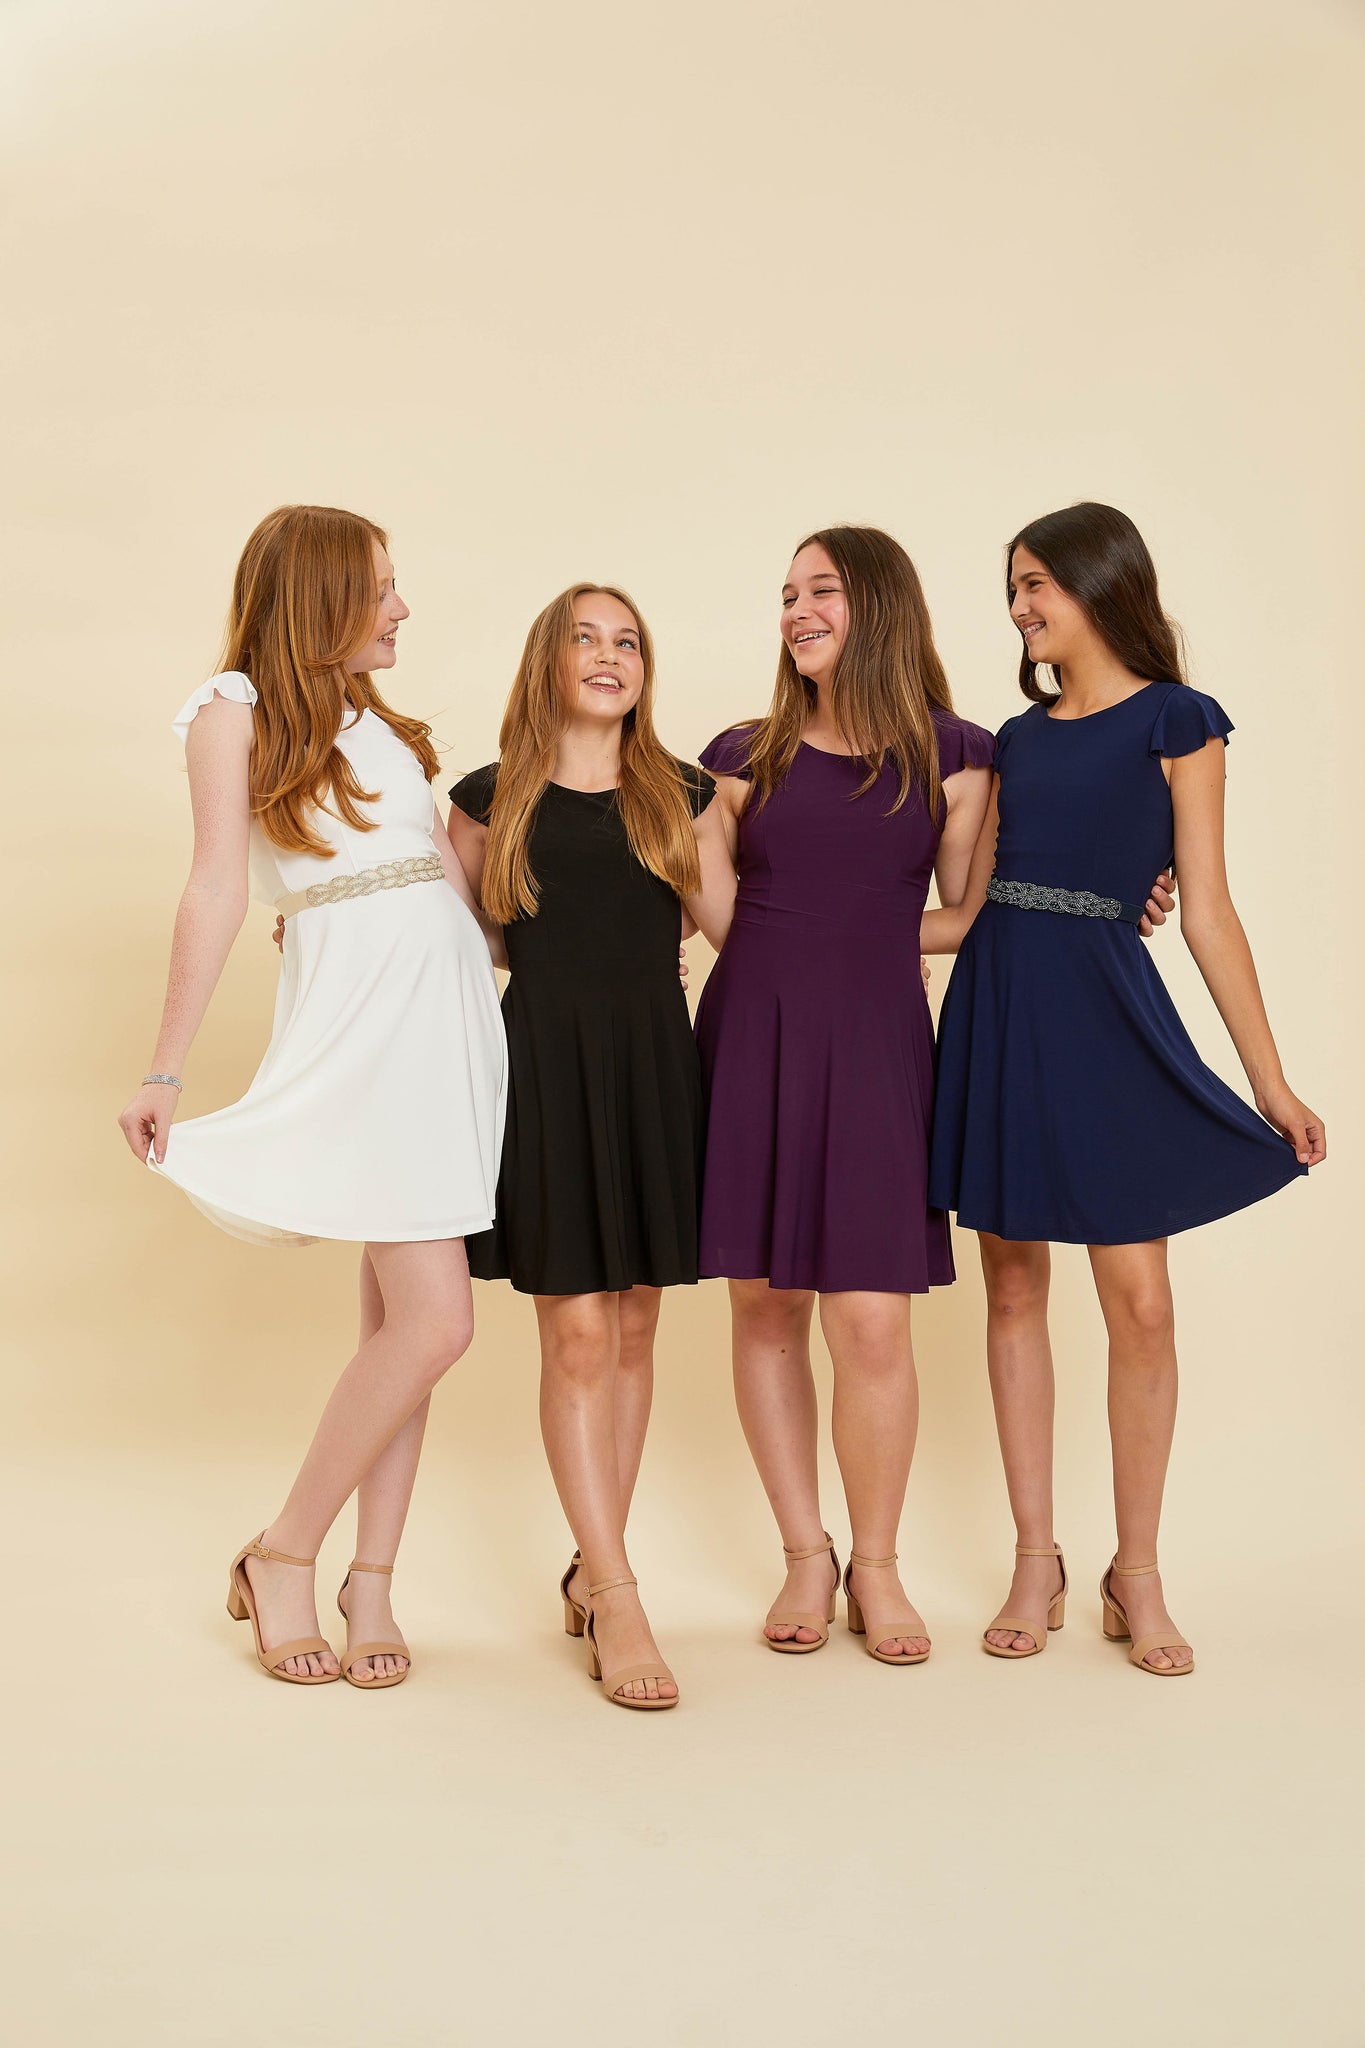 Four girls all in the flutter sleeve dress and nude heels.